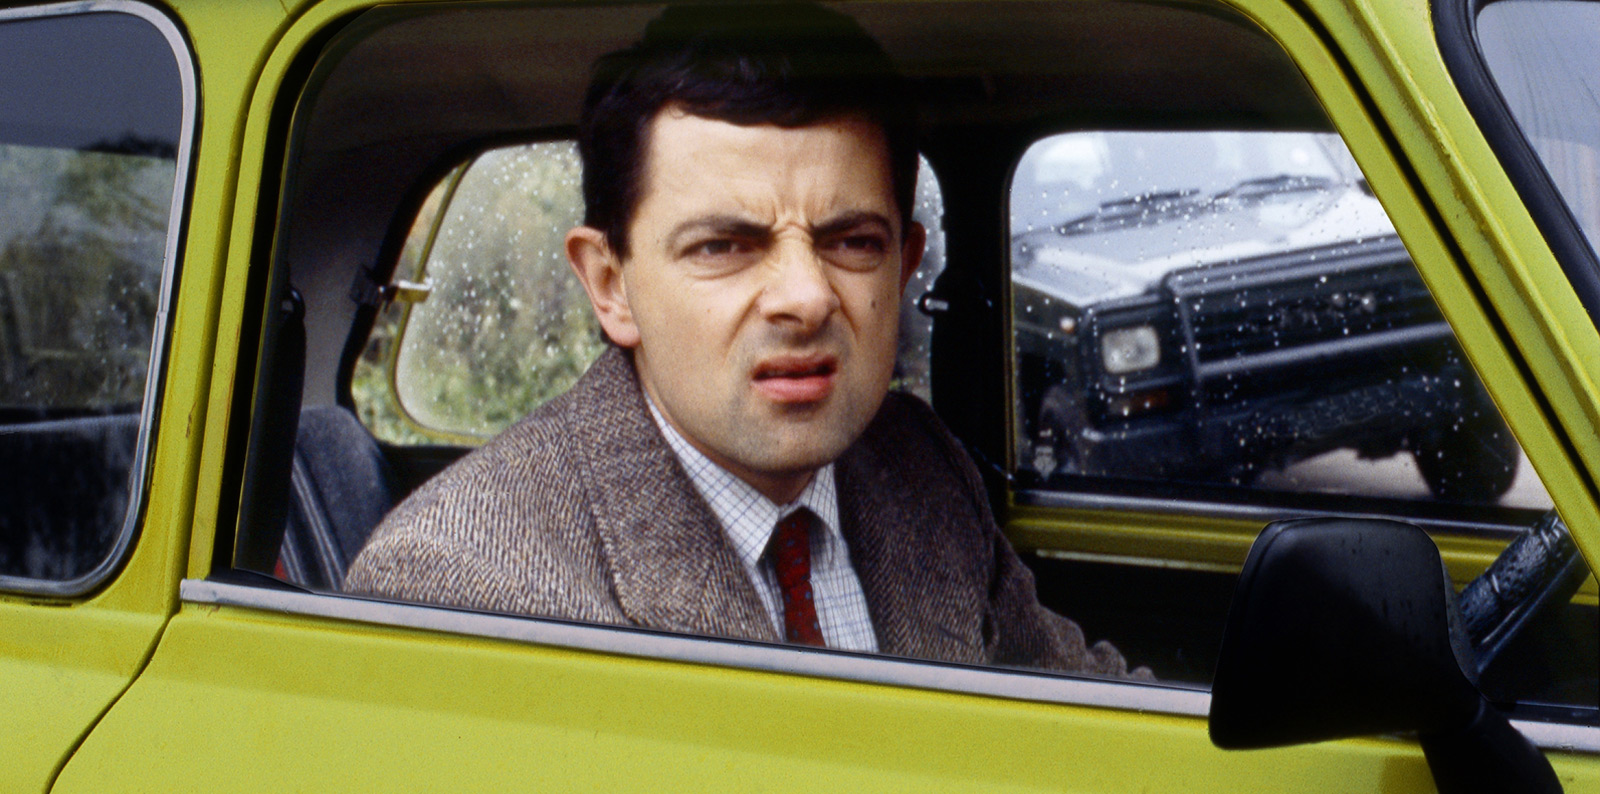 Going beyond the TV screen: The business of Mr Bean on YouTube